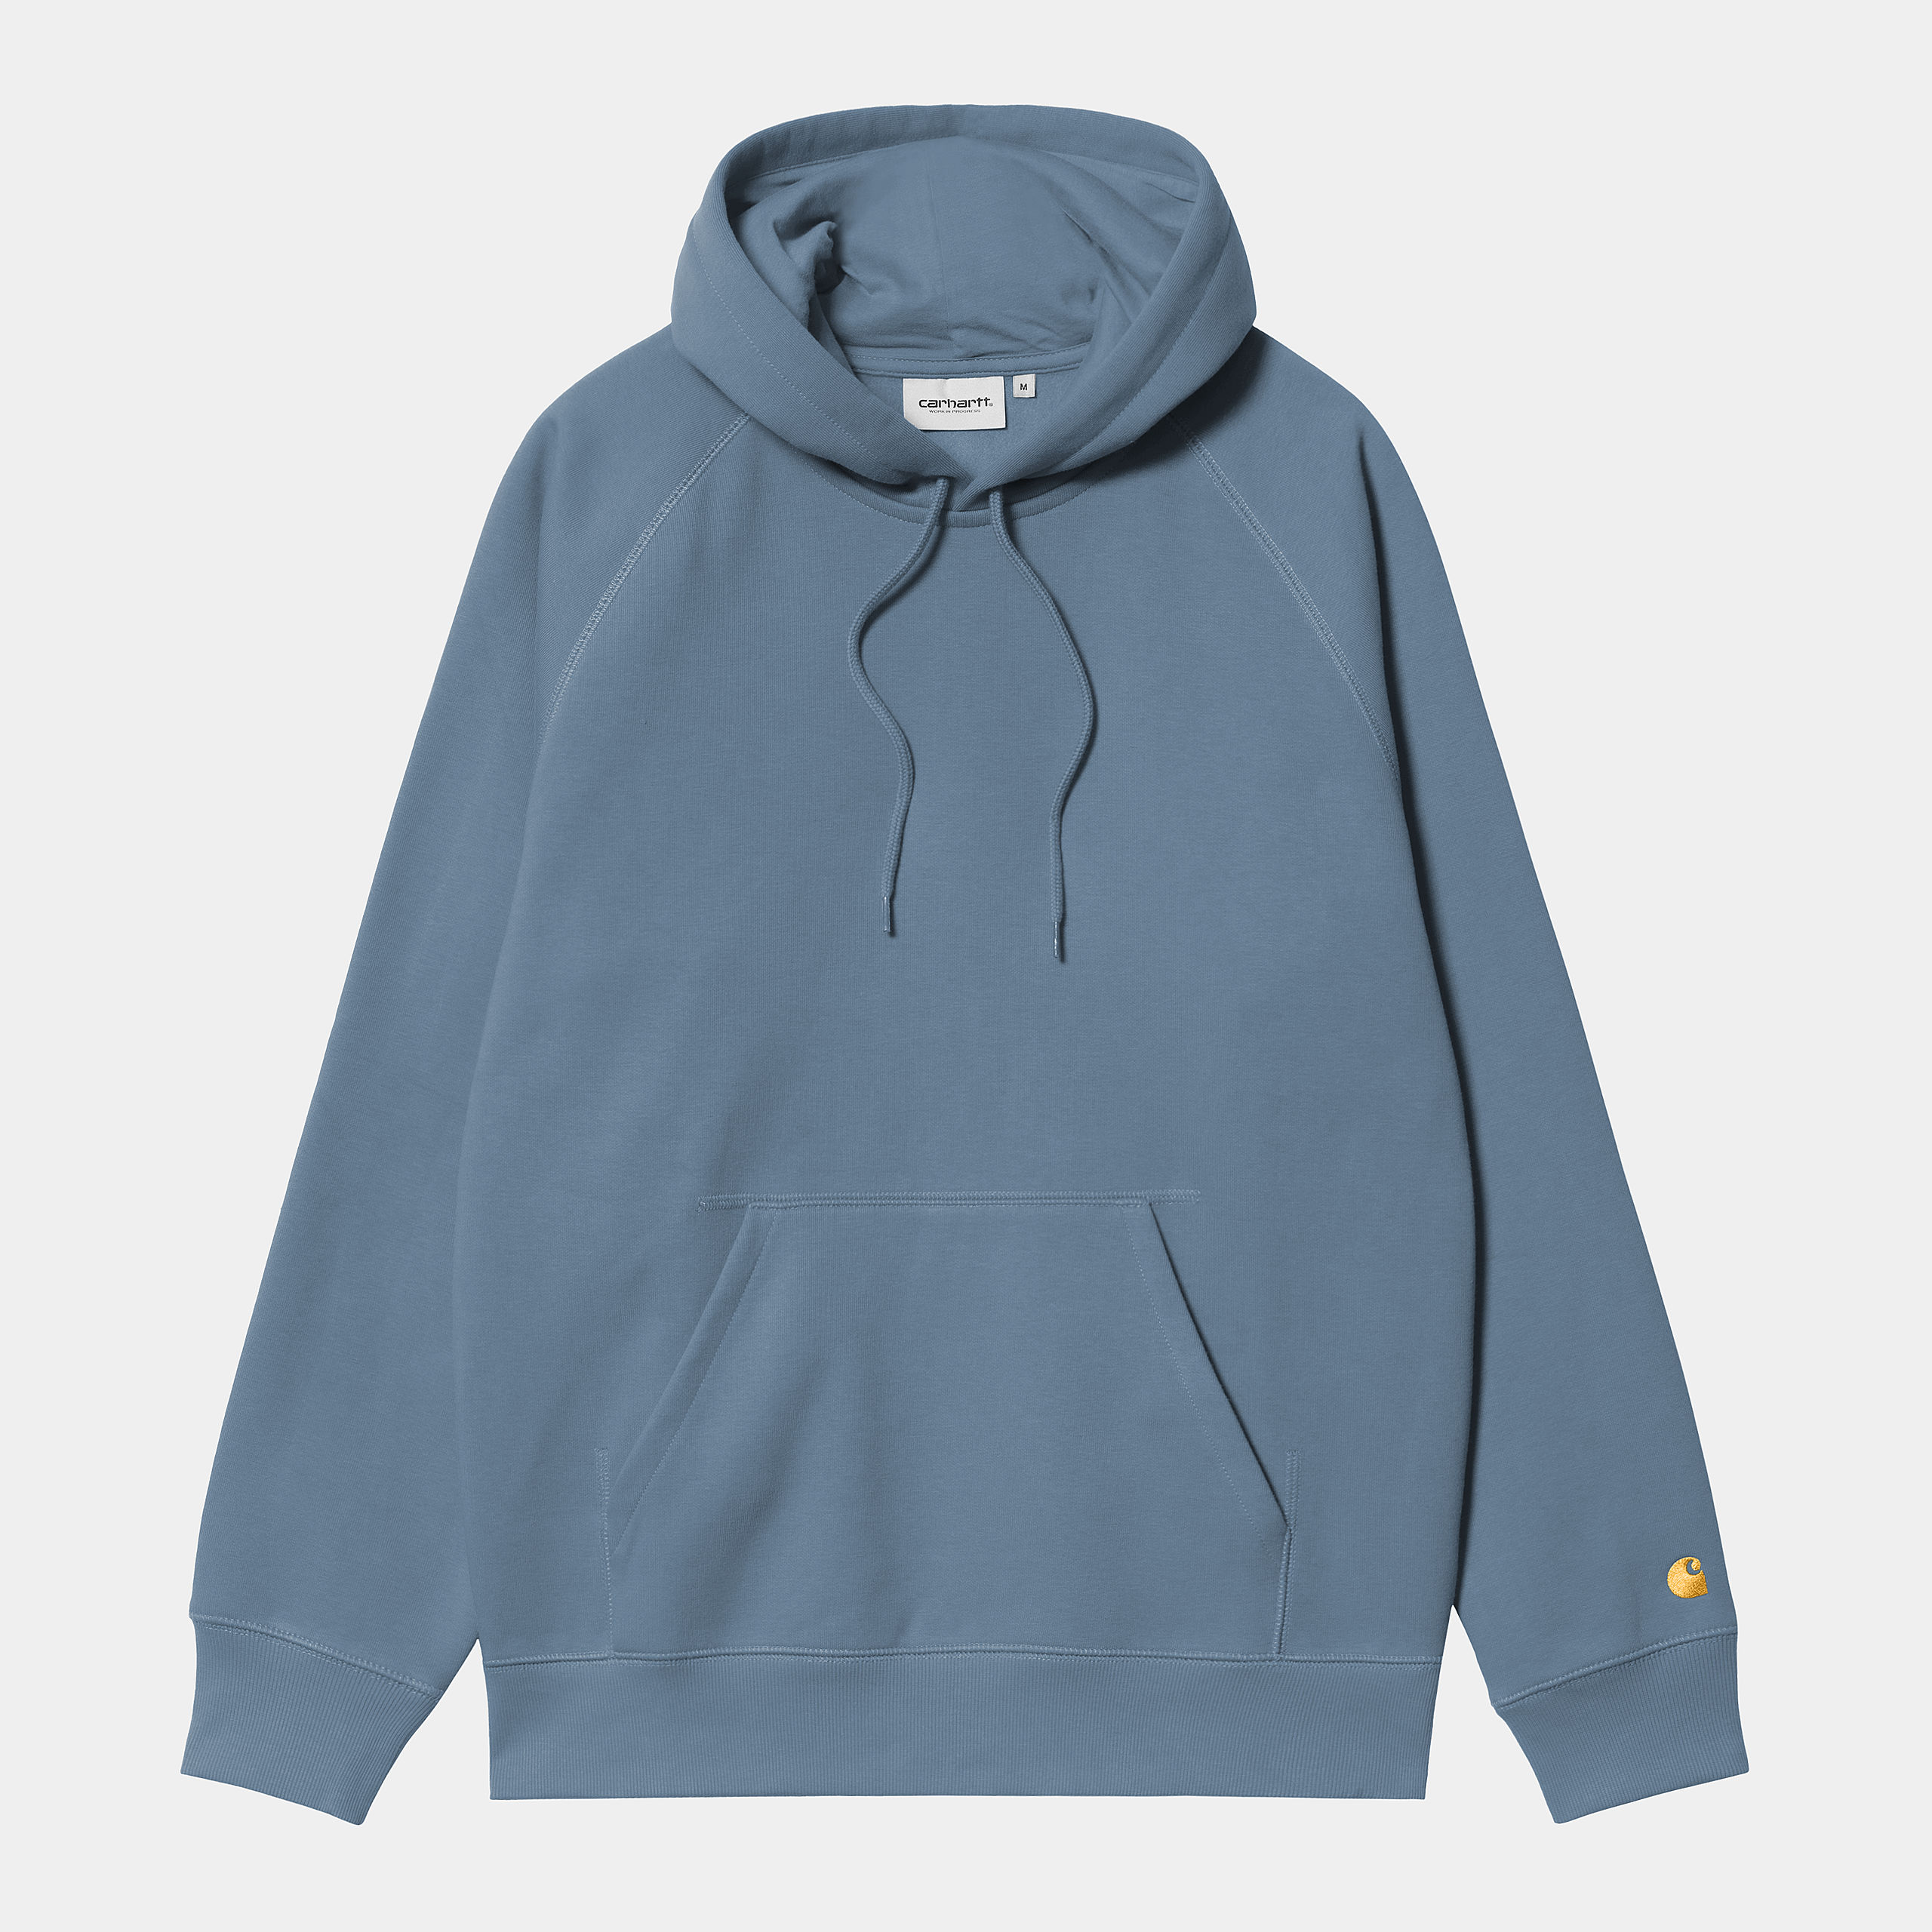 Carhartt WIP - HOODED CHASE SWEAT - Positano/Gold